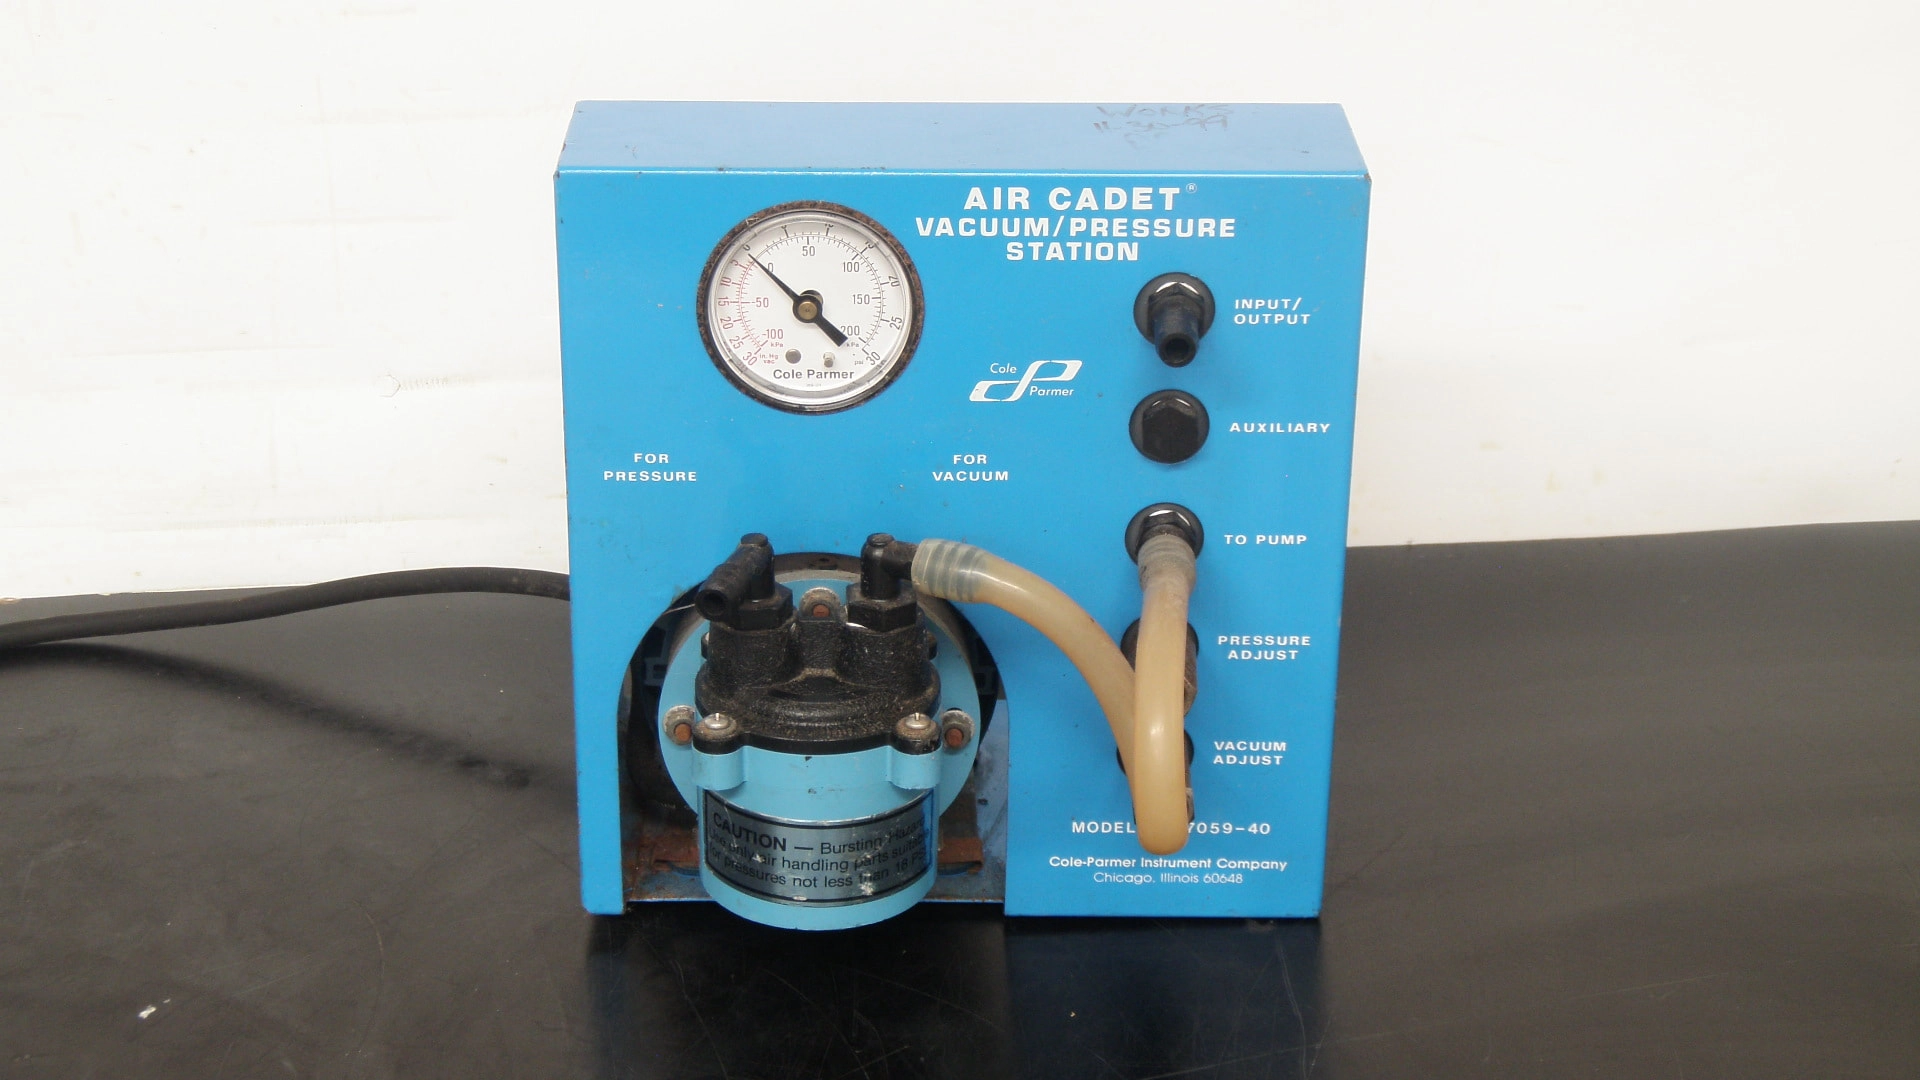 Cole Palmer  Air Cadet Vacuum  Pressure Station, 7059-40, Tested!